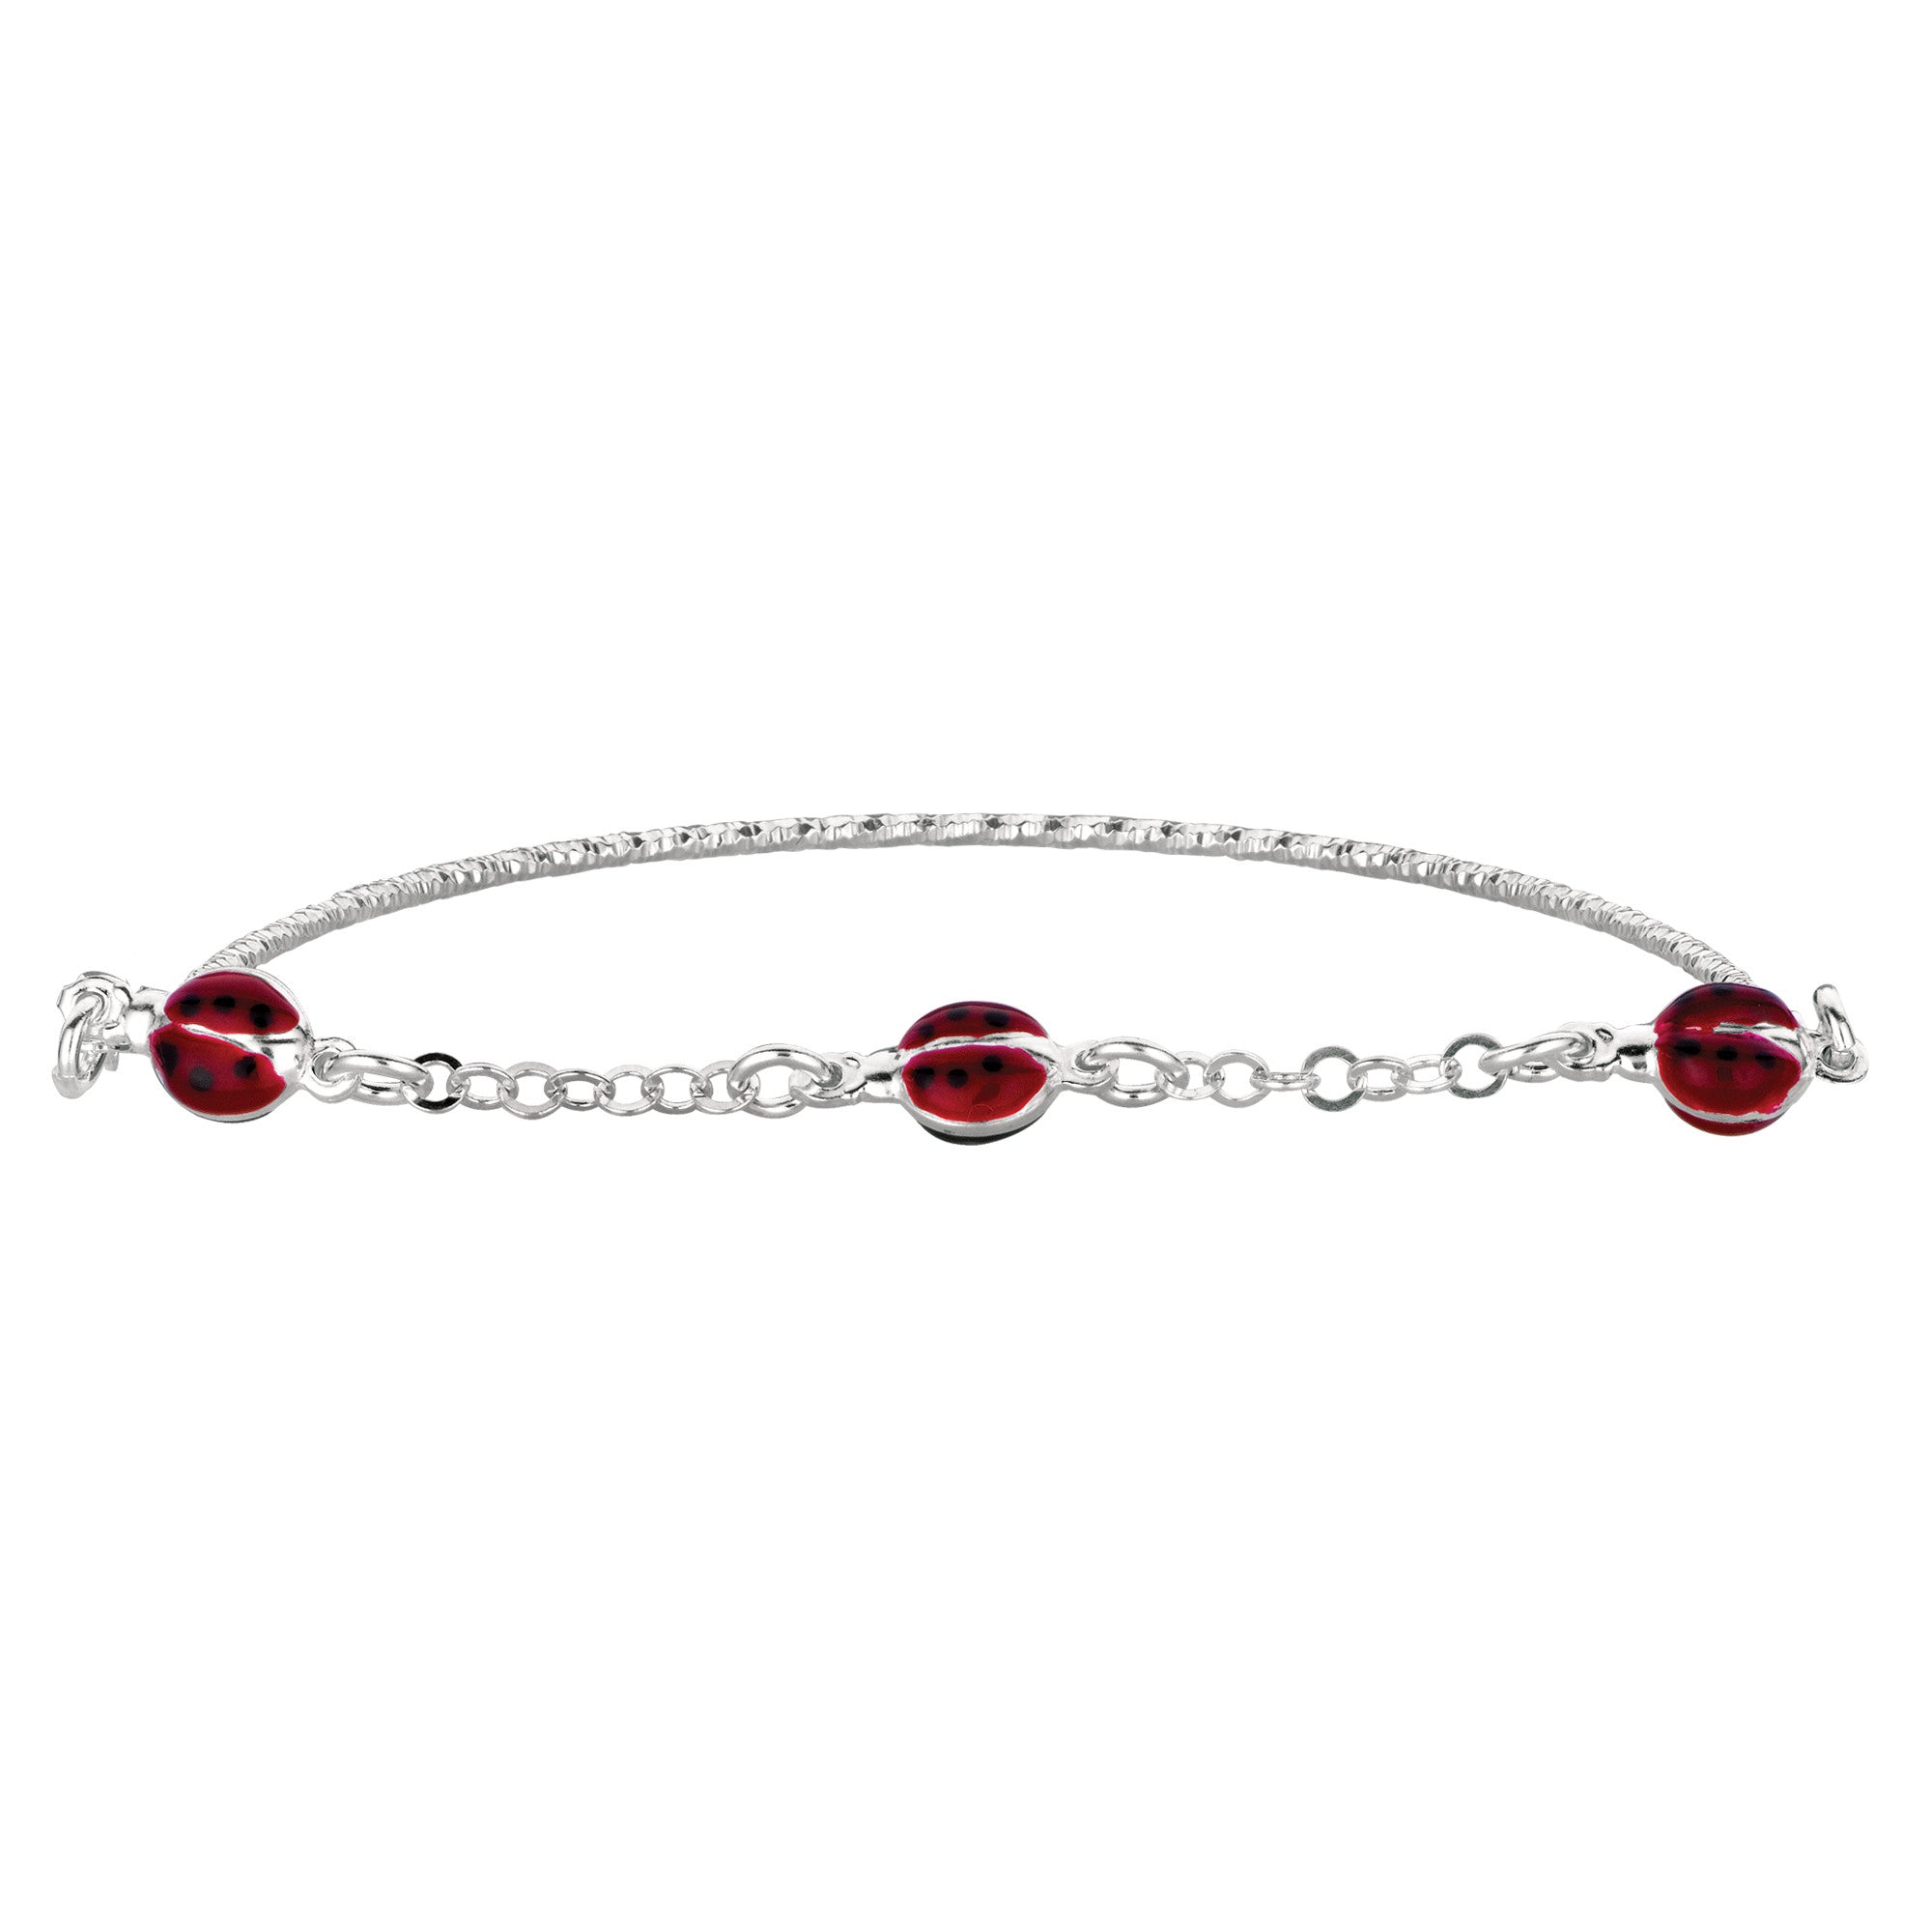 Baby Bangle With Ladybug Enameled Charms In Sterling Silver - 5.5 Inch - JewelryAffairs
 - 1